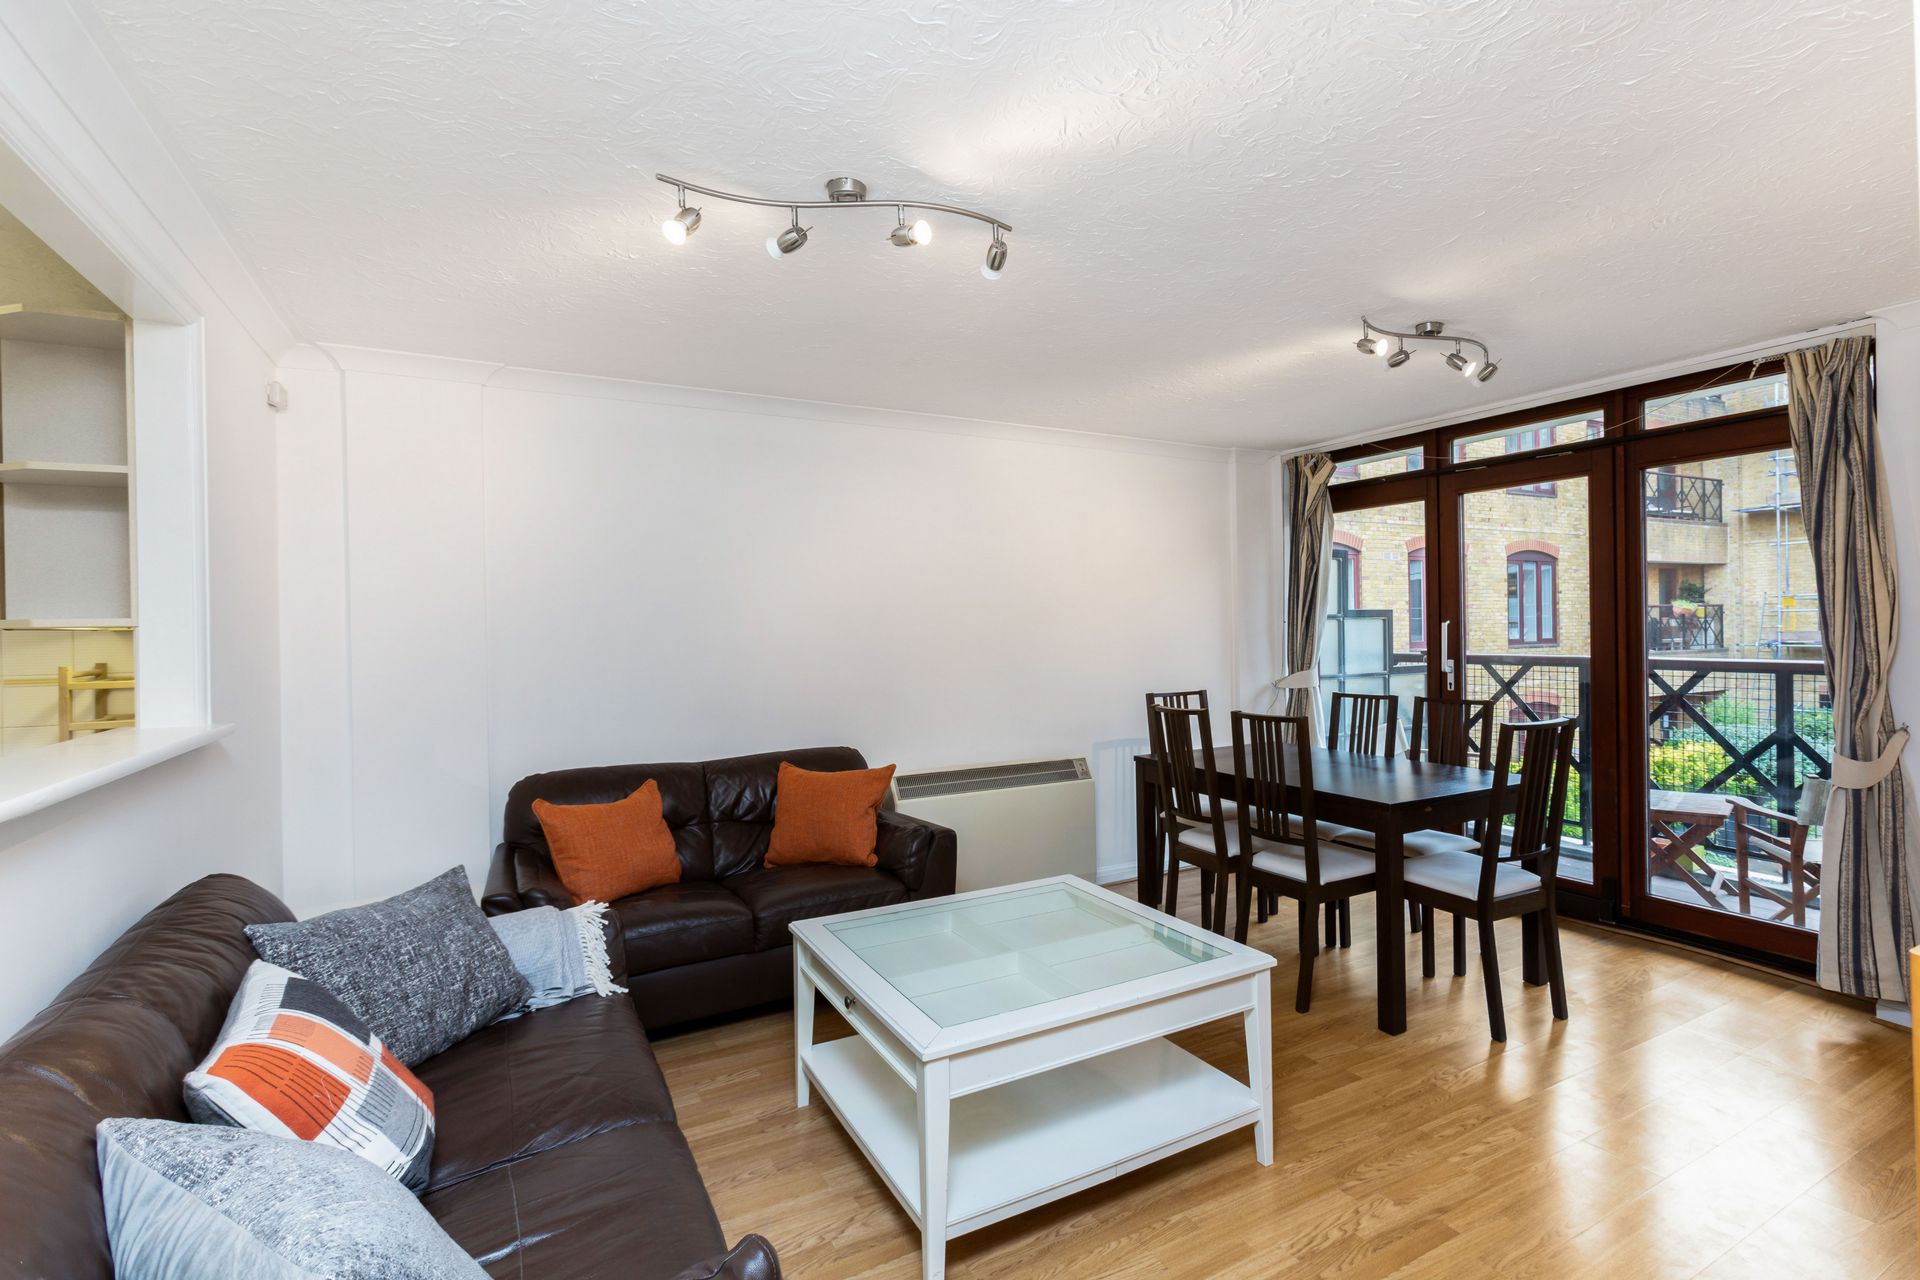 3 Bedroom Apartment to rent in Wapping, London, E1W